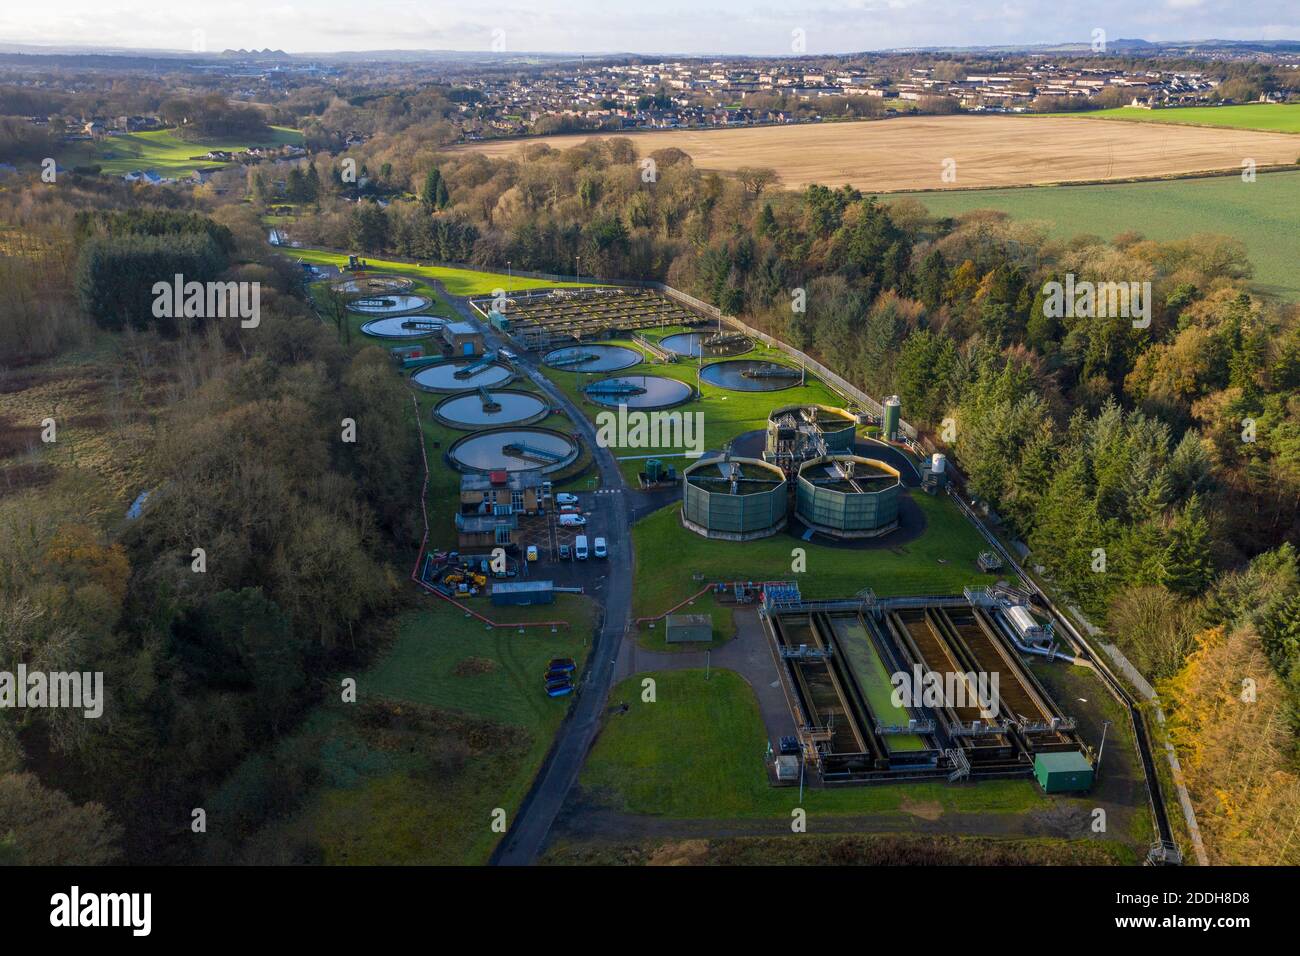 Aerial view of the East Calder Waste Water Treatment Works and Almondell Country Park, West Lothian, Scotland. Stock Photo